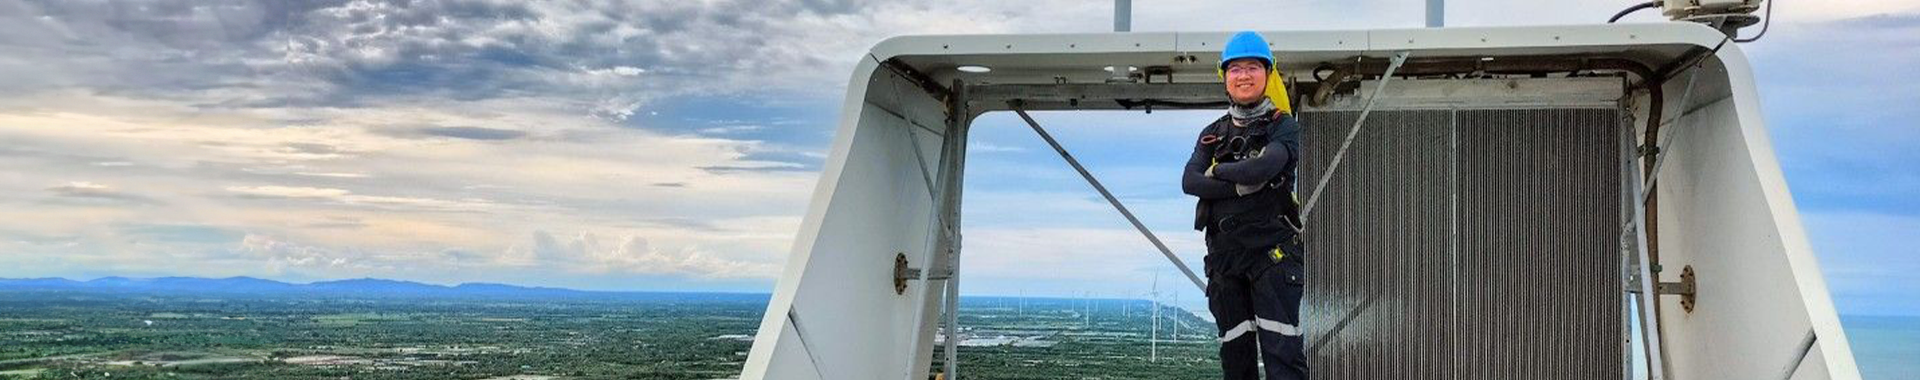 Engineer smiling at the top of a wind turbine